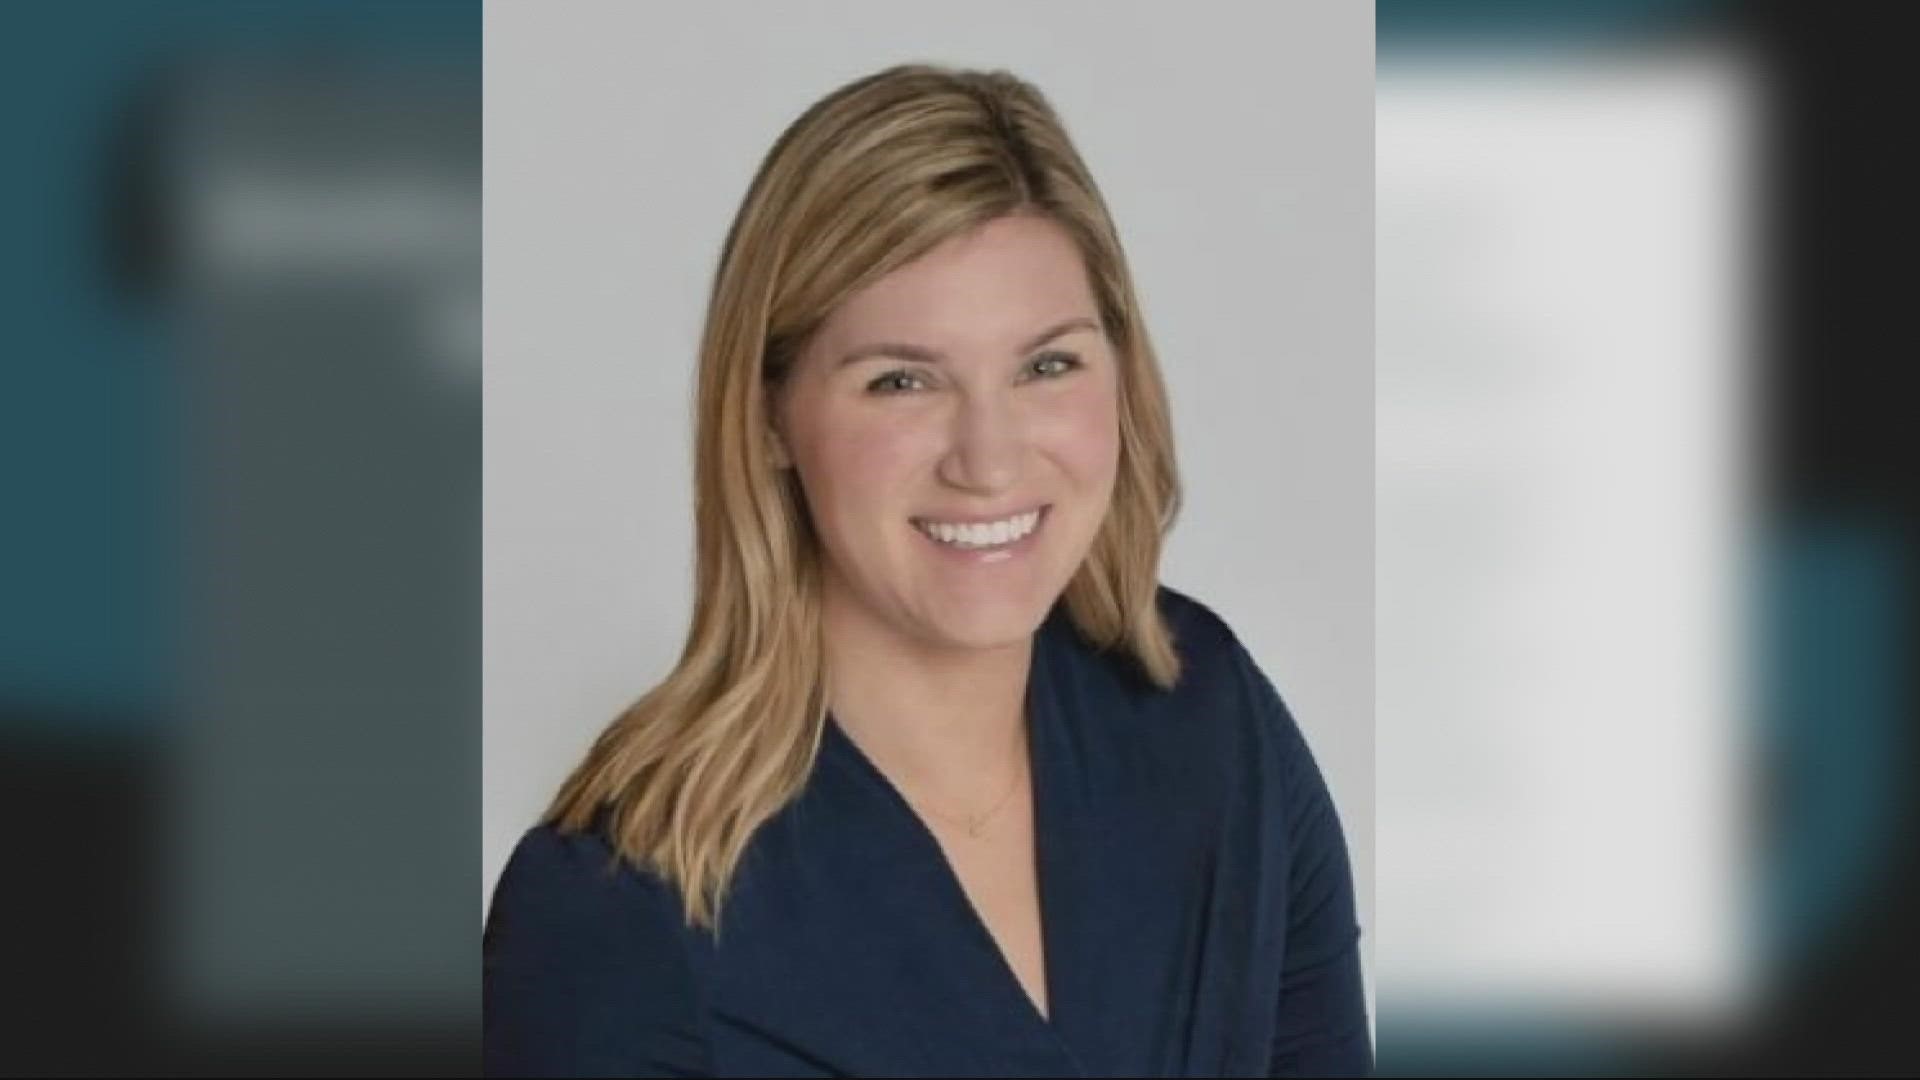 An Oregon native recently died of a rare blood clotting disorder linked to the Johnson & Johnson vaccine. She's the fourth person in the country to die from it.